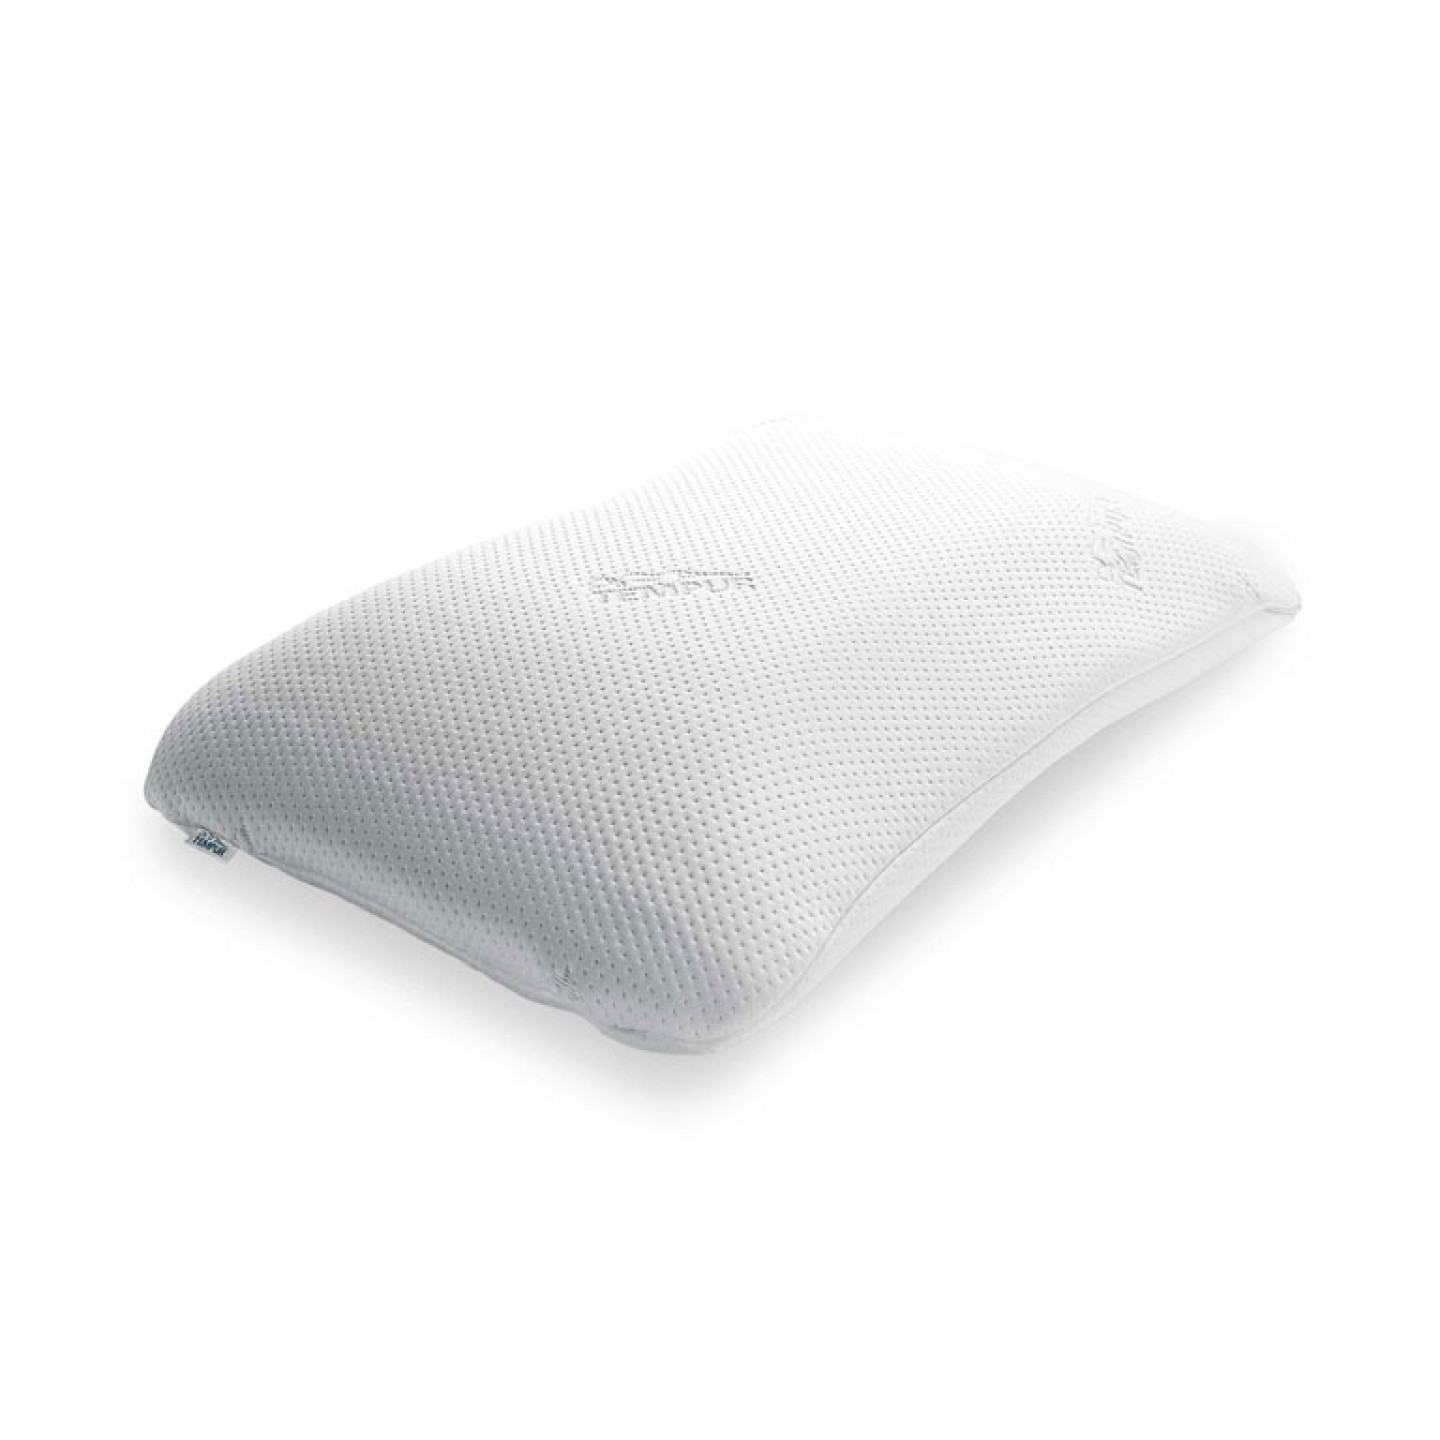 THE SYMPHONY PILLOW by Tempur